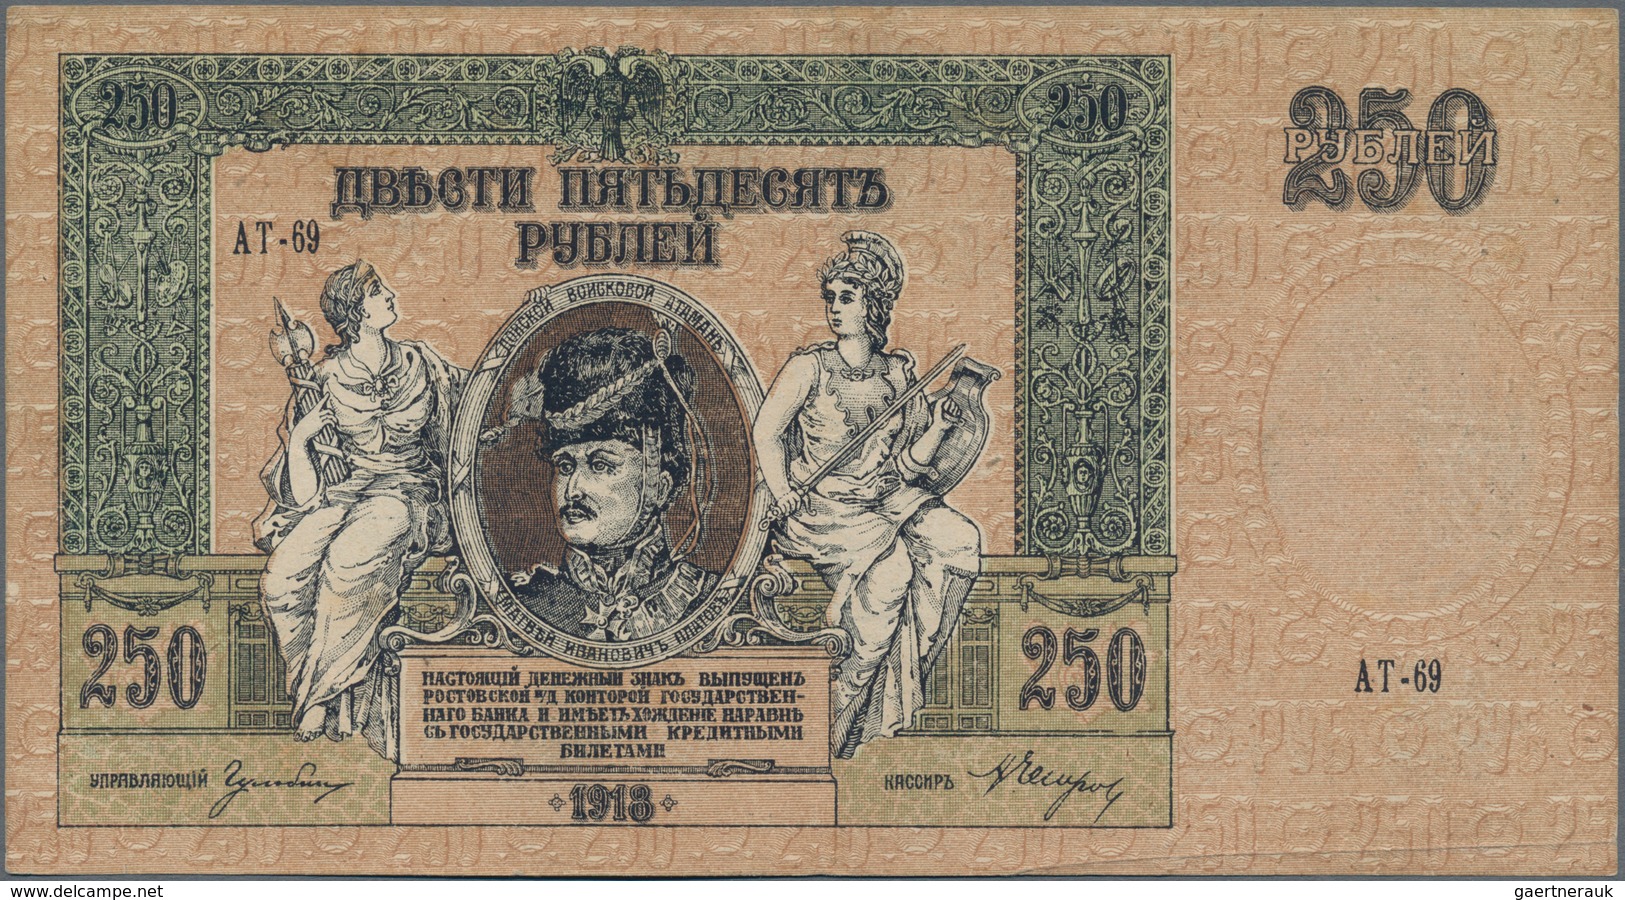 Russia / Russland: South Russia – set with 6 banknotes 50 Kopeks (aUNC), 1 Ruble (XF), 25 Rubles (VF